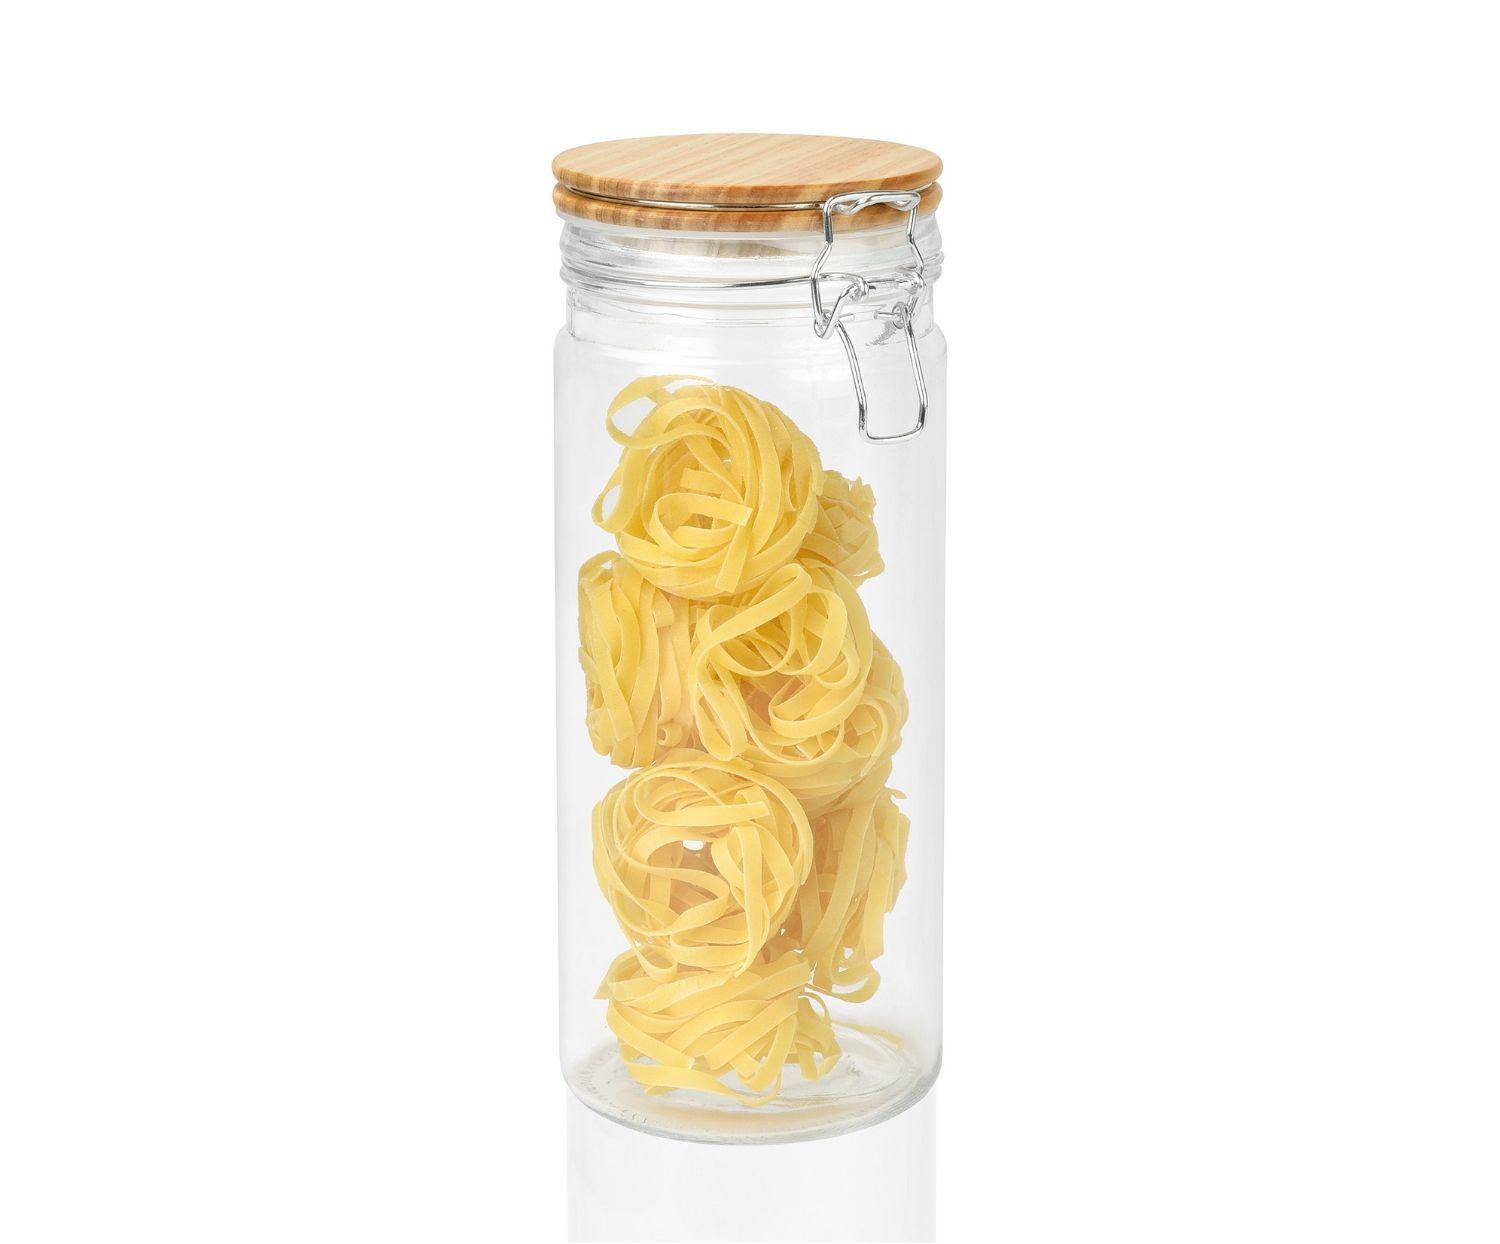 Glass Canister W/ Wooden Lid